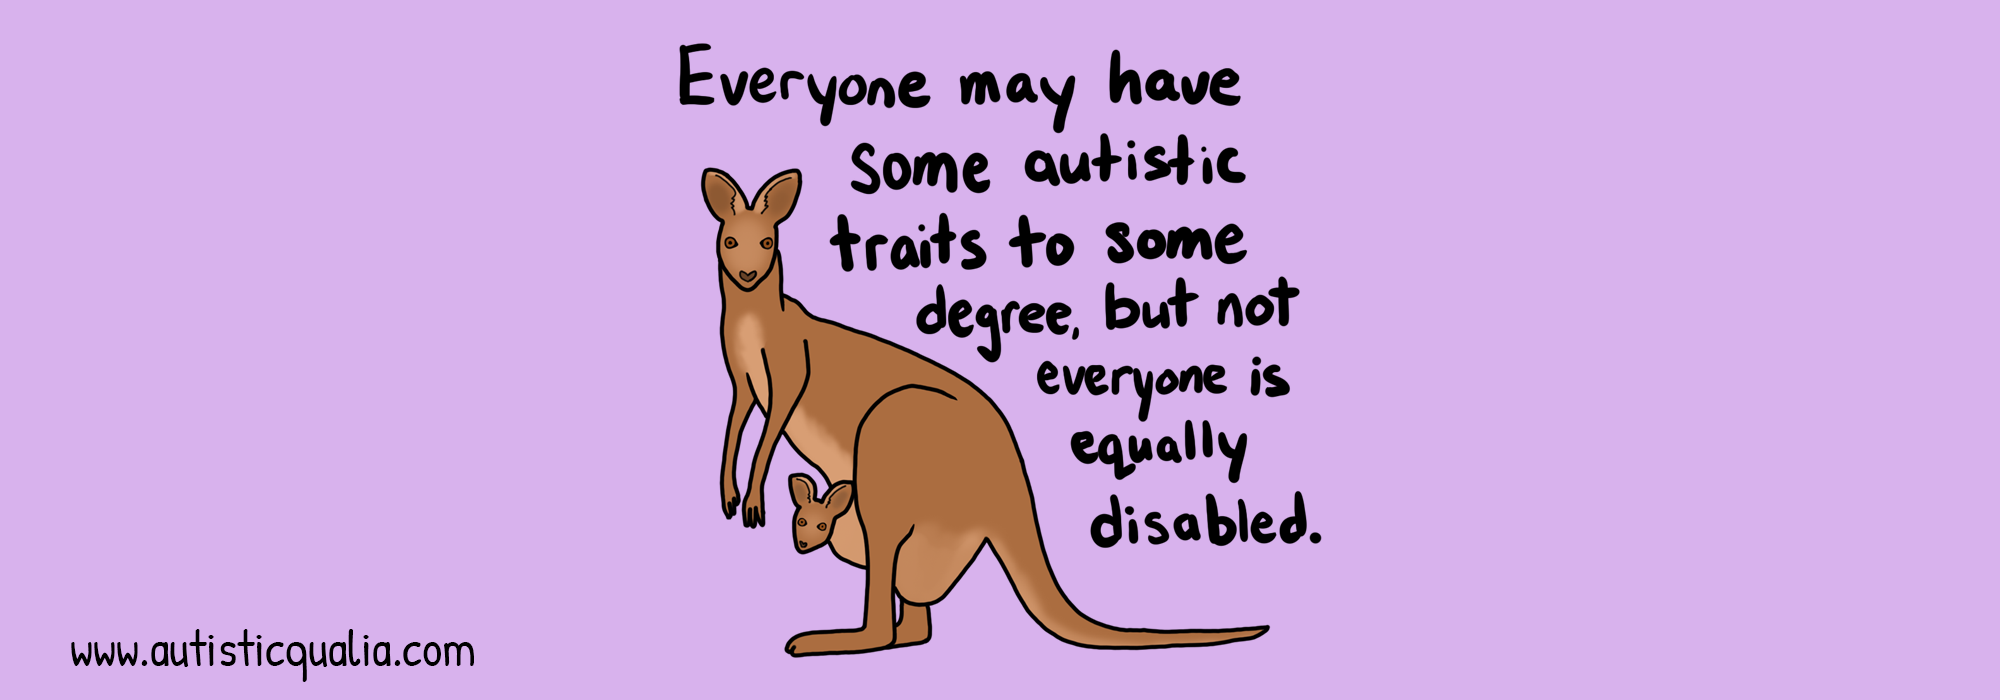 A drawing of a kangaroo on a purple background with handwritten text that says, "Everyone may have some autistic traits to some degree, but not everyone is equally disabled."